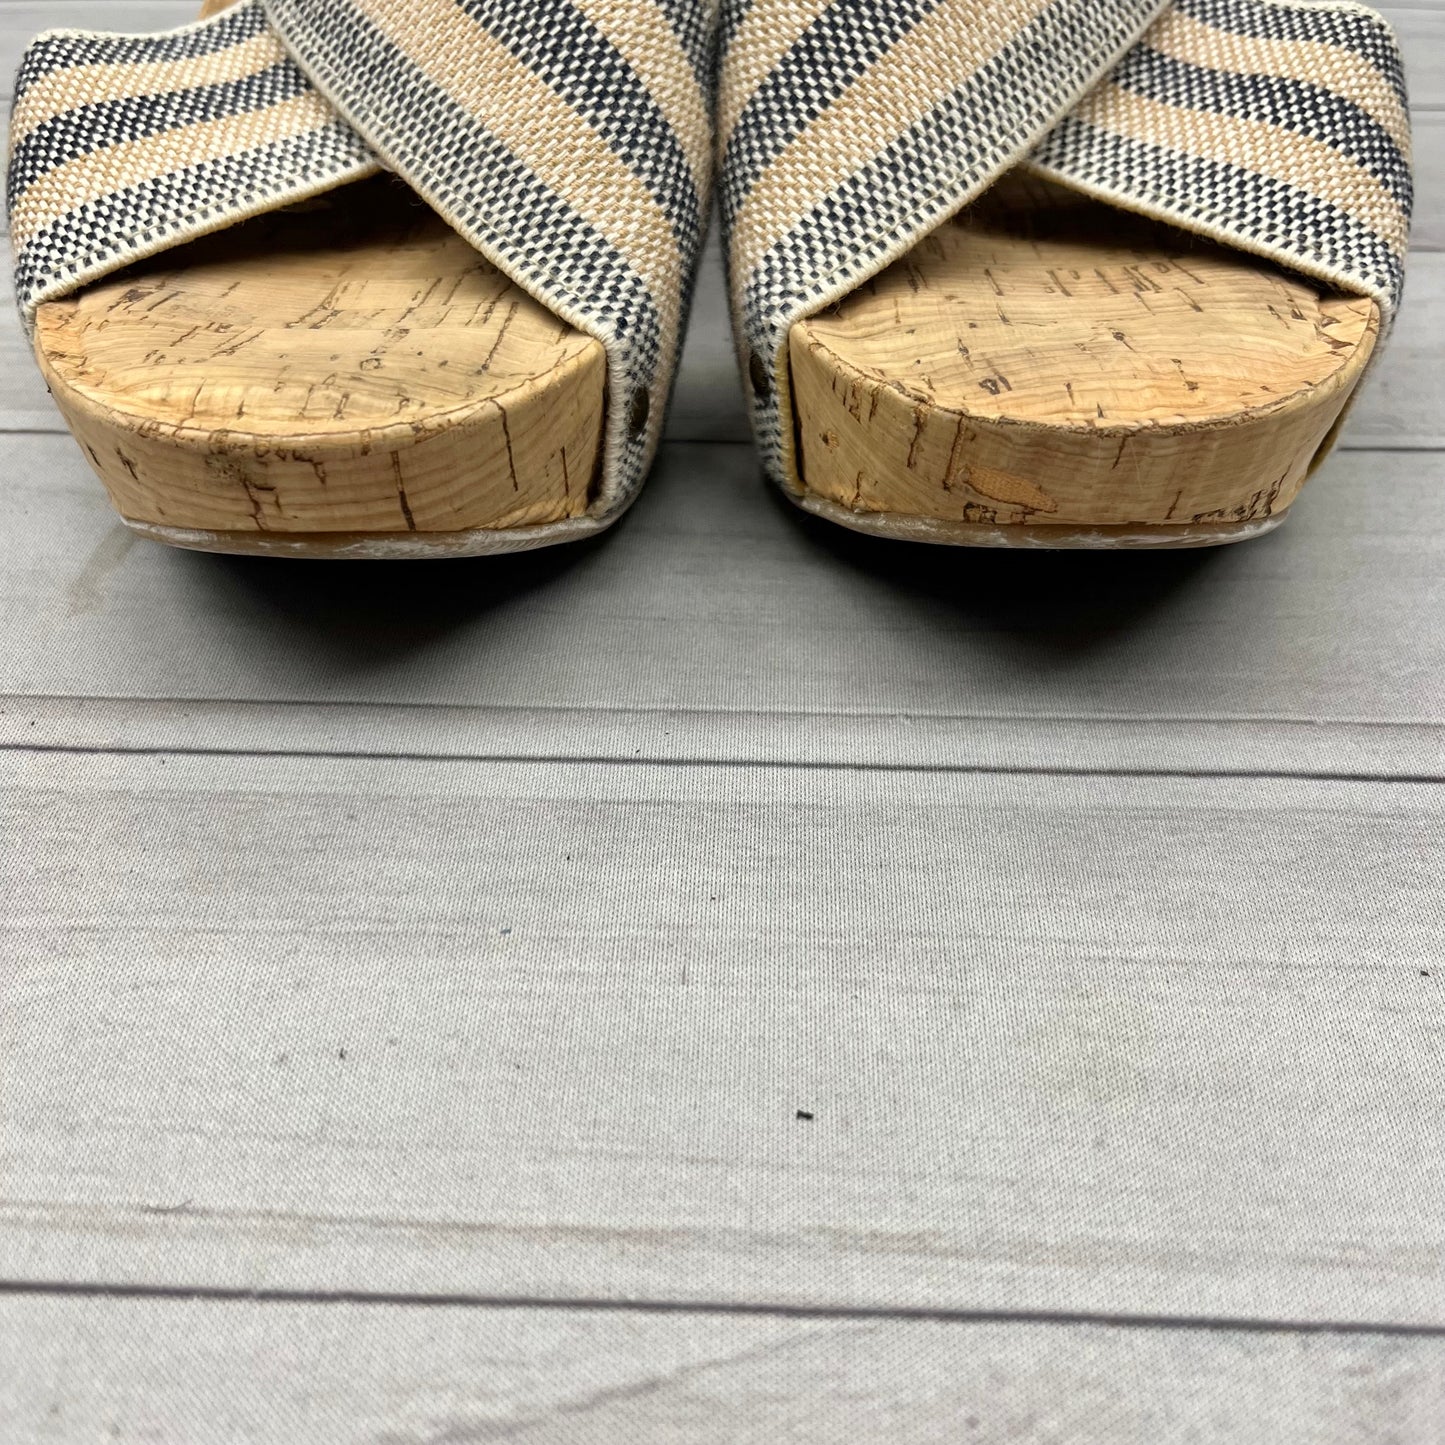 Sandals Heels Wedge By Lucky Brand  Size: 8.5